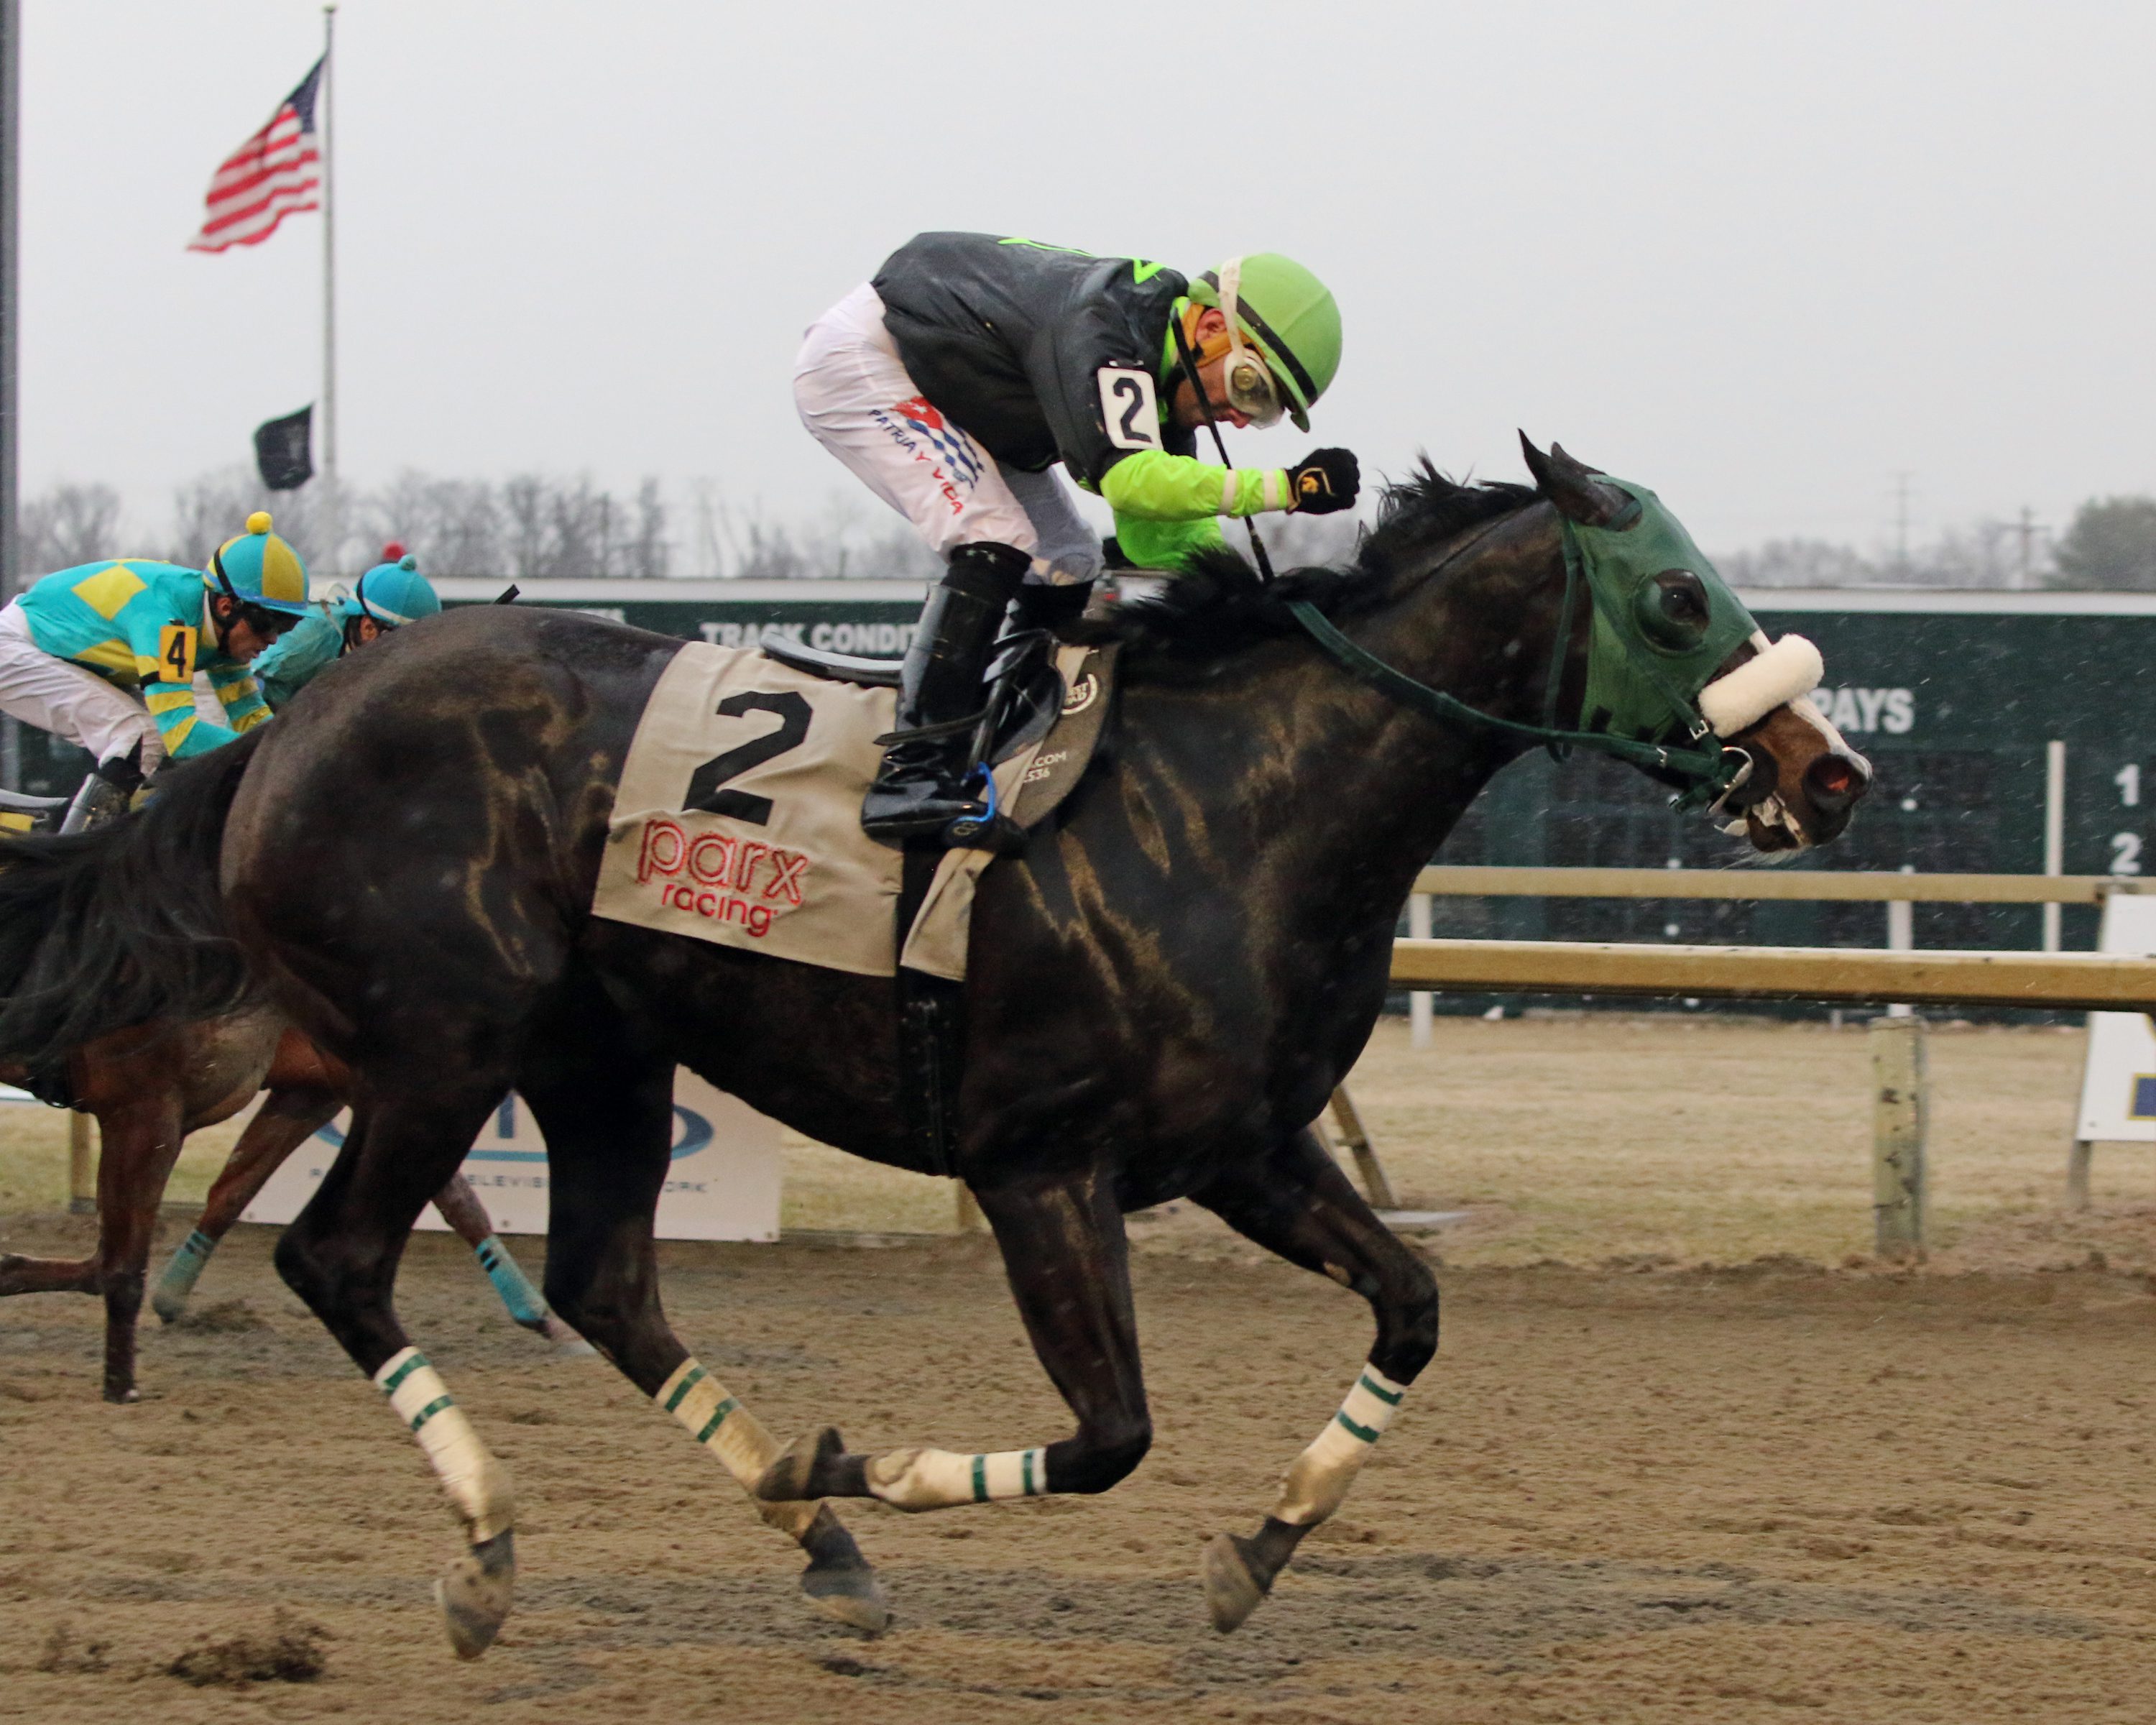 Hey Mamaluke with Andy Hernandez win The Penn's Landing at Parx on March 7, 2022. Photo By: Chad B. Harmon